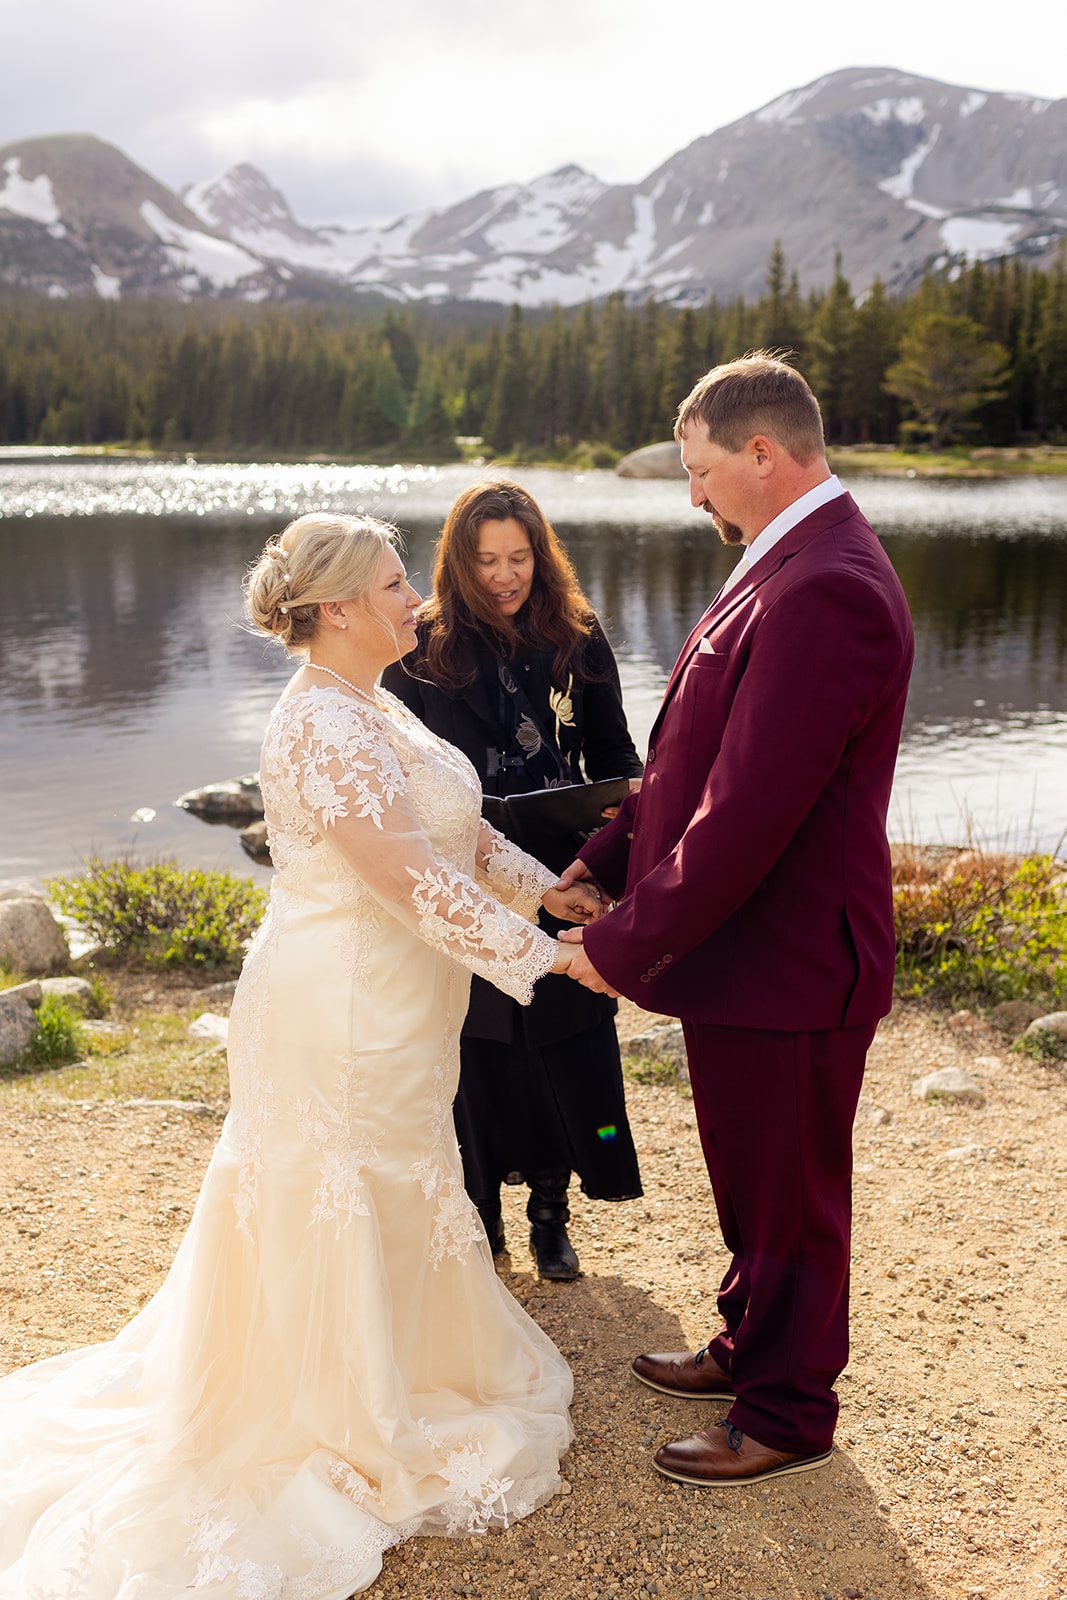 Bride and groom holding hands during their ceremony at Brainard Lake.